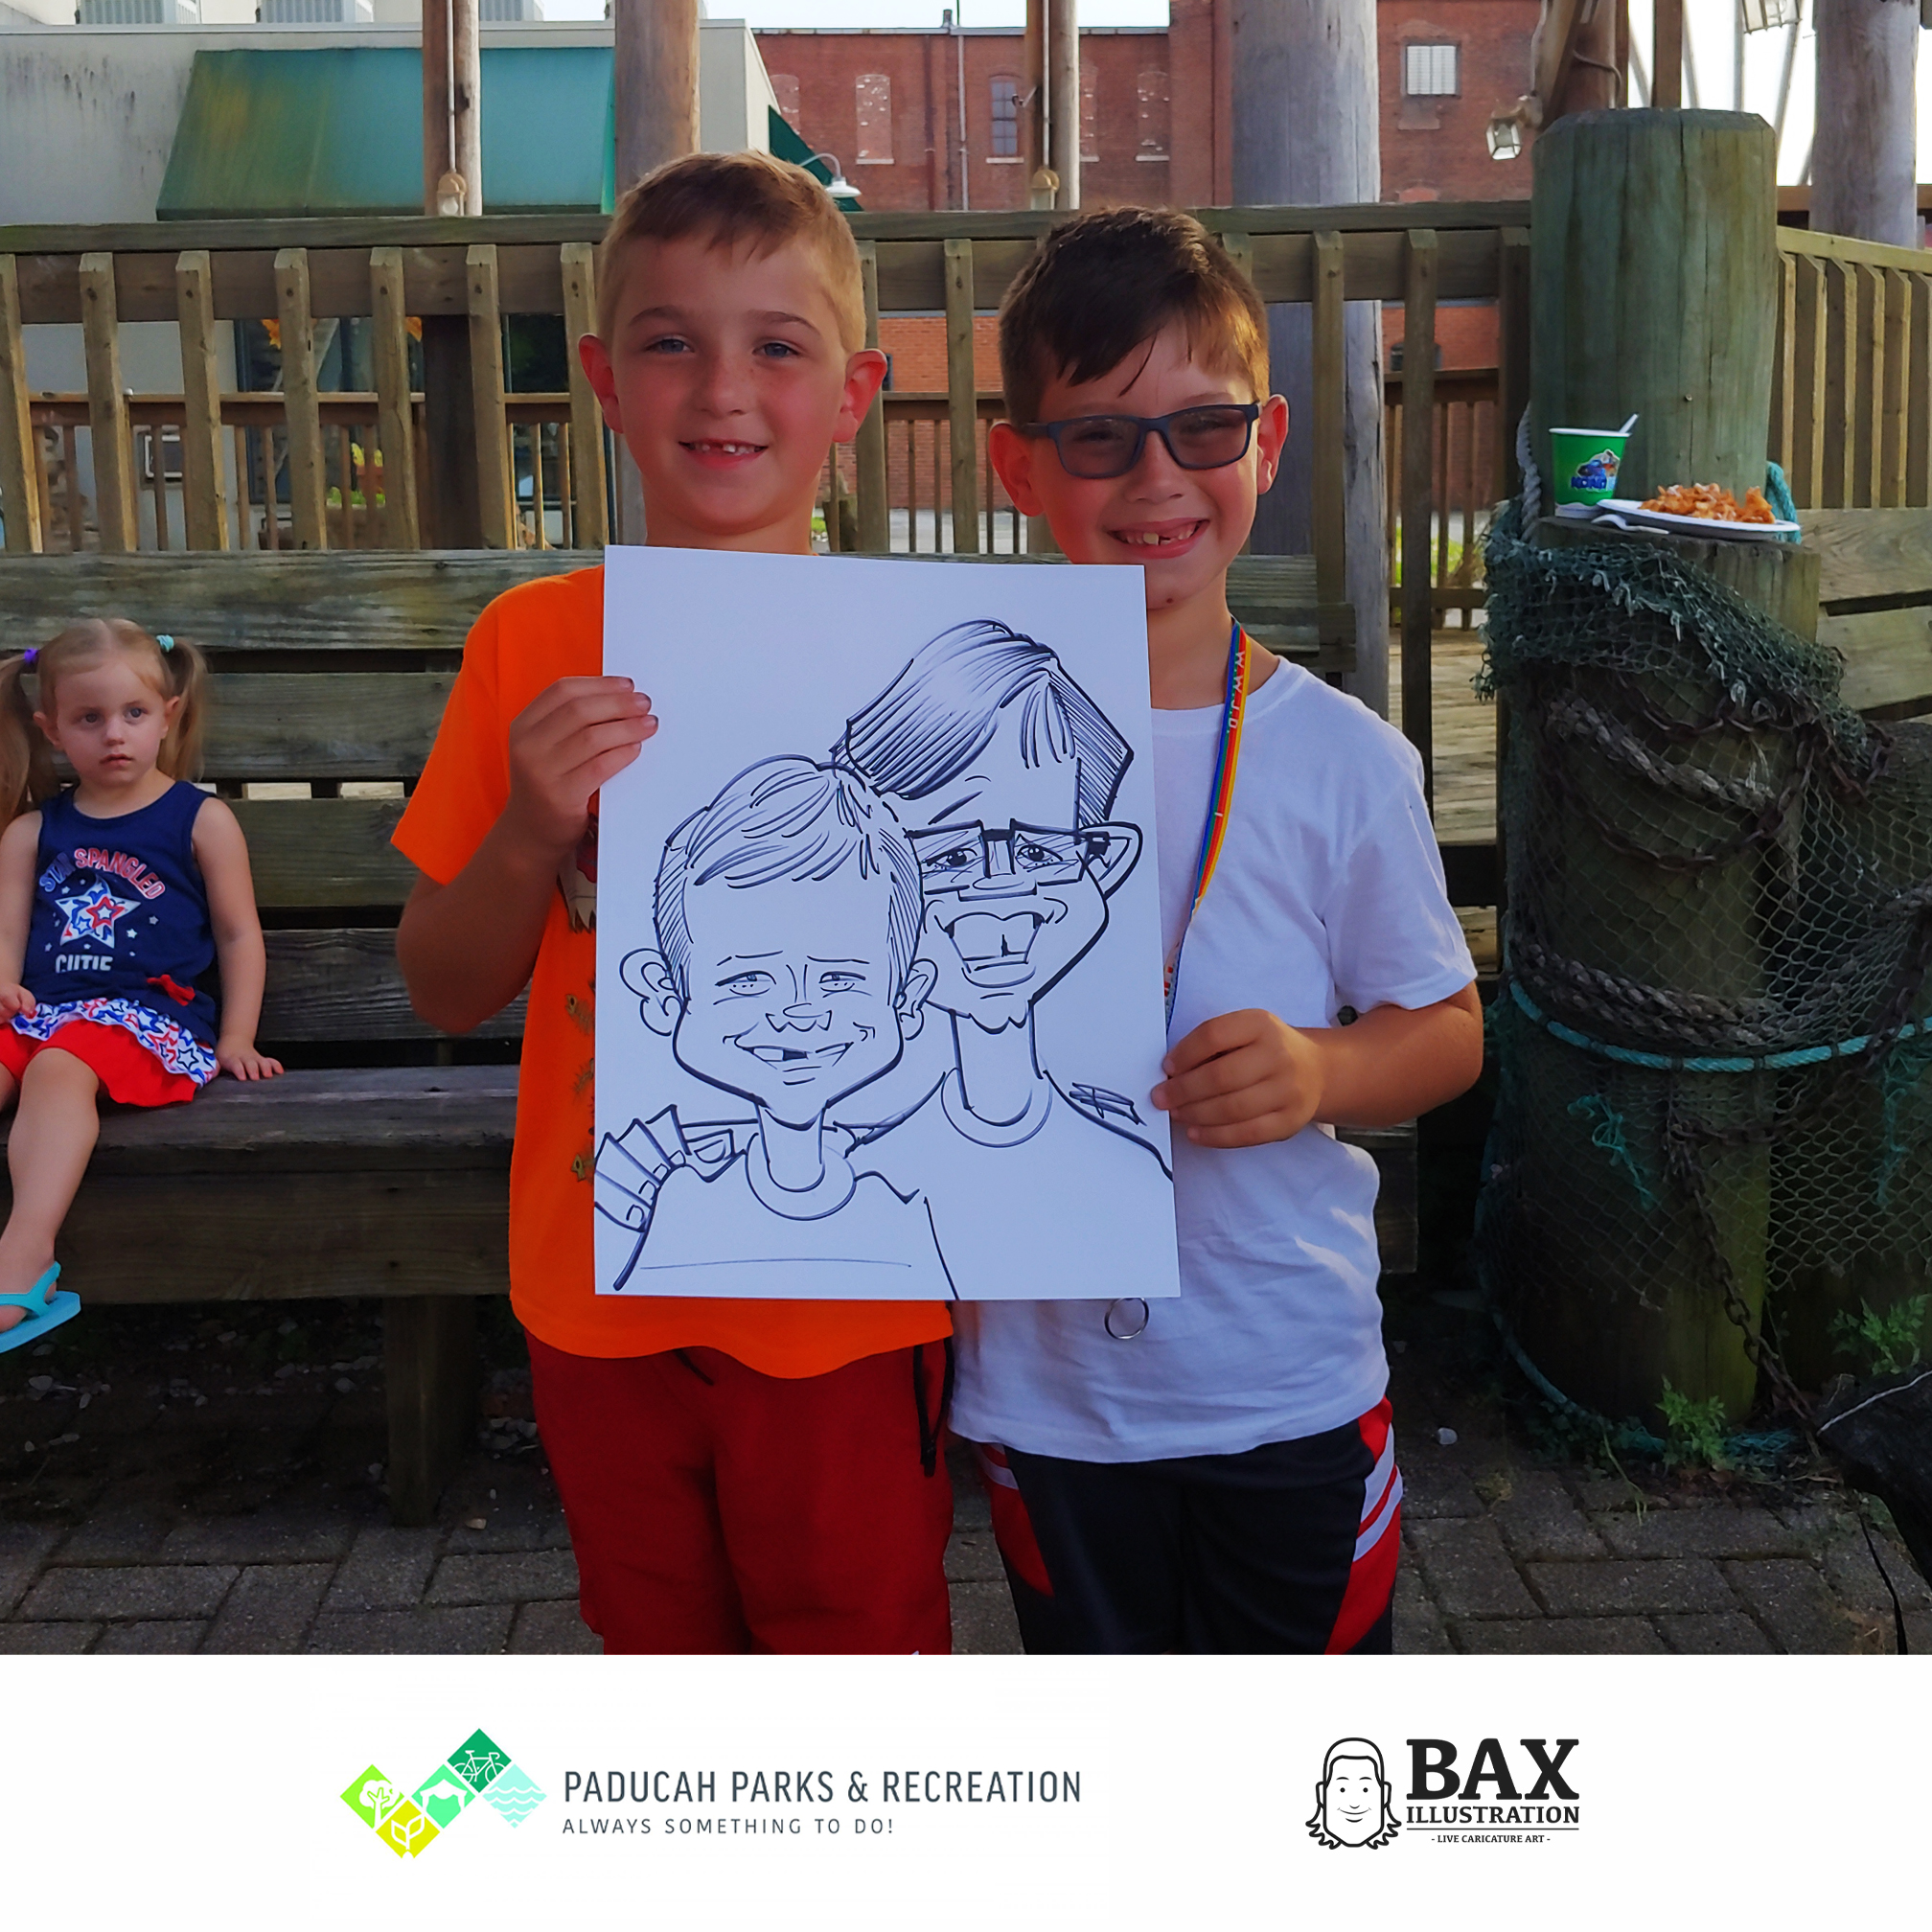 kids holding caricature by Bax Illustration in Paducah Kentucky at the 2019 Independence Day Celebration